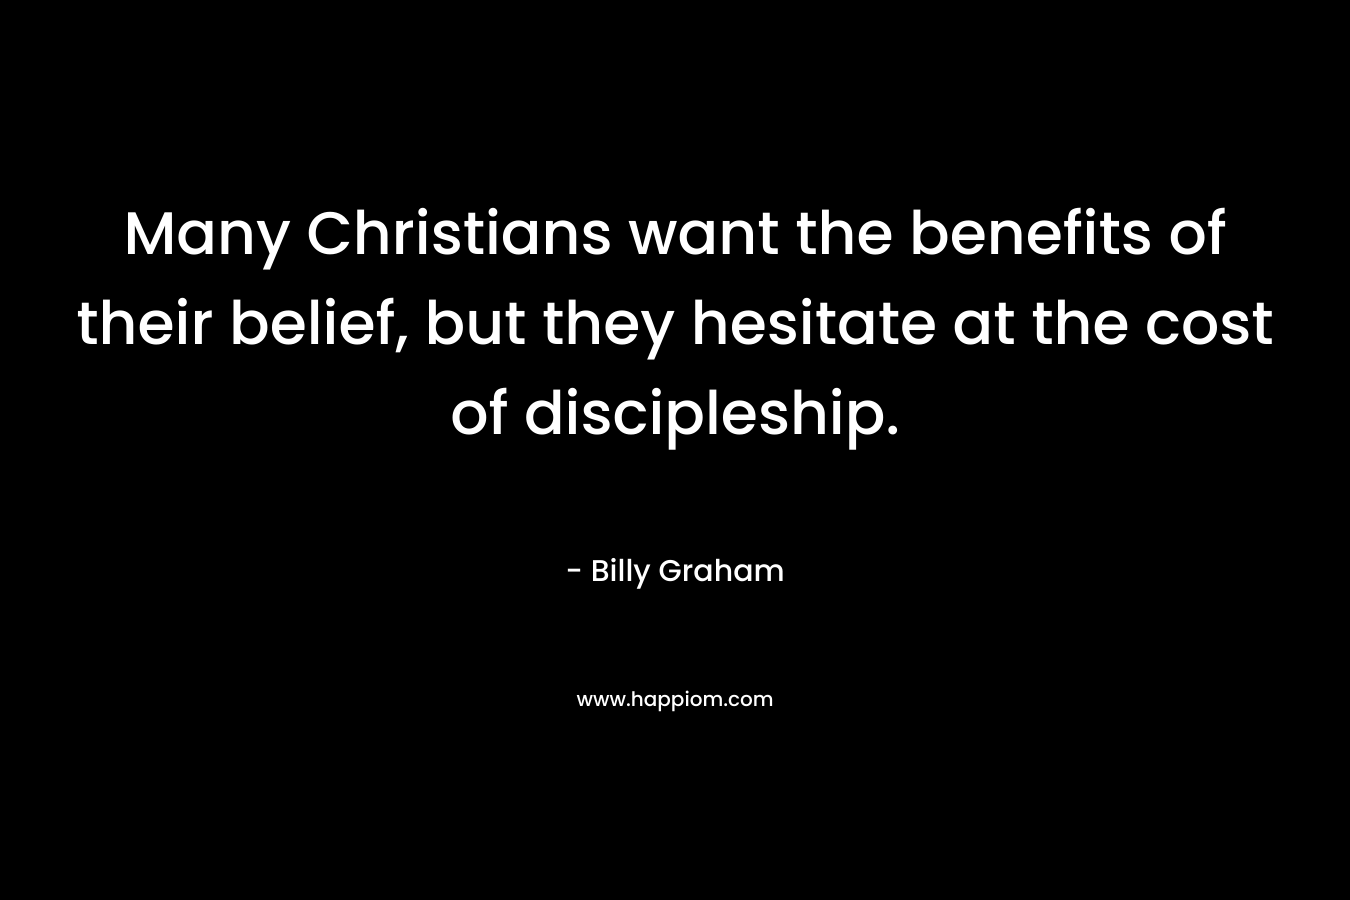 Many Christians want the benefits of their belief, but they hesitate at the cost of discipleship. – Billy Graham